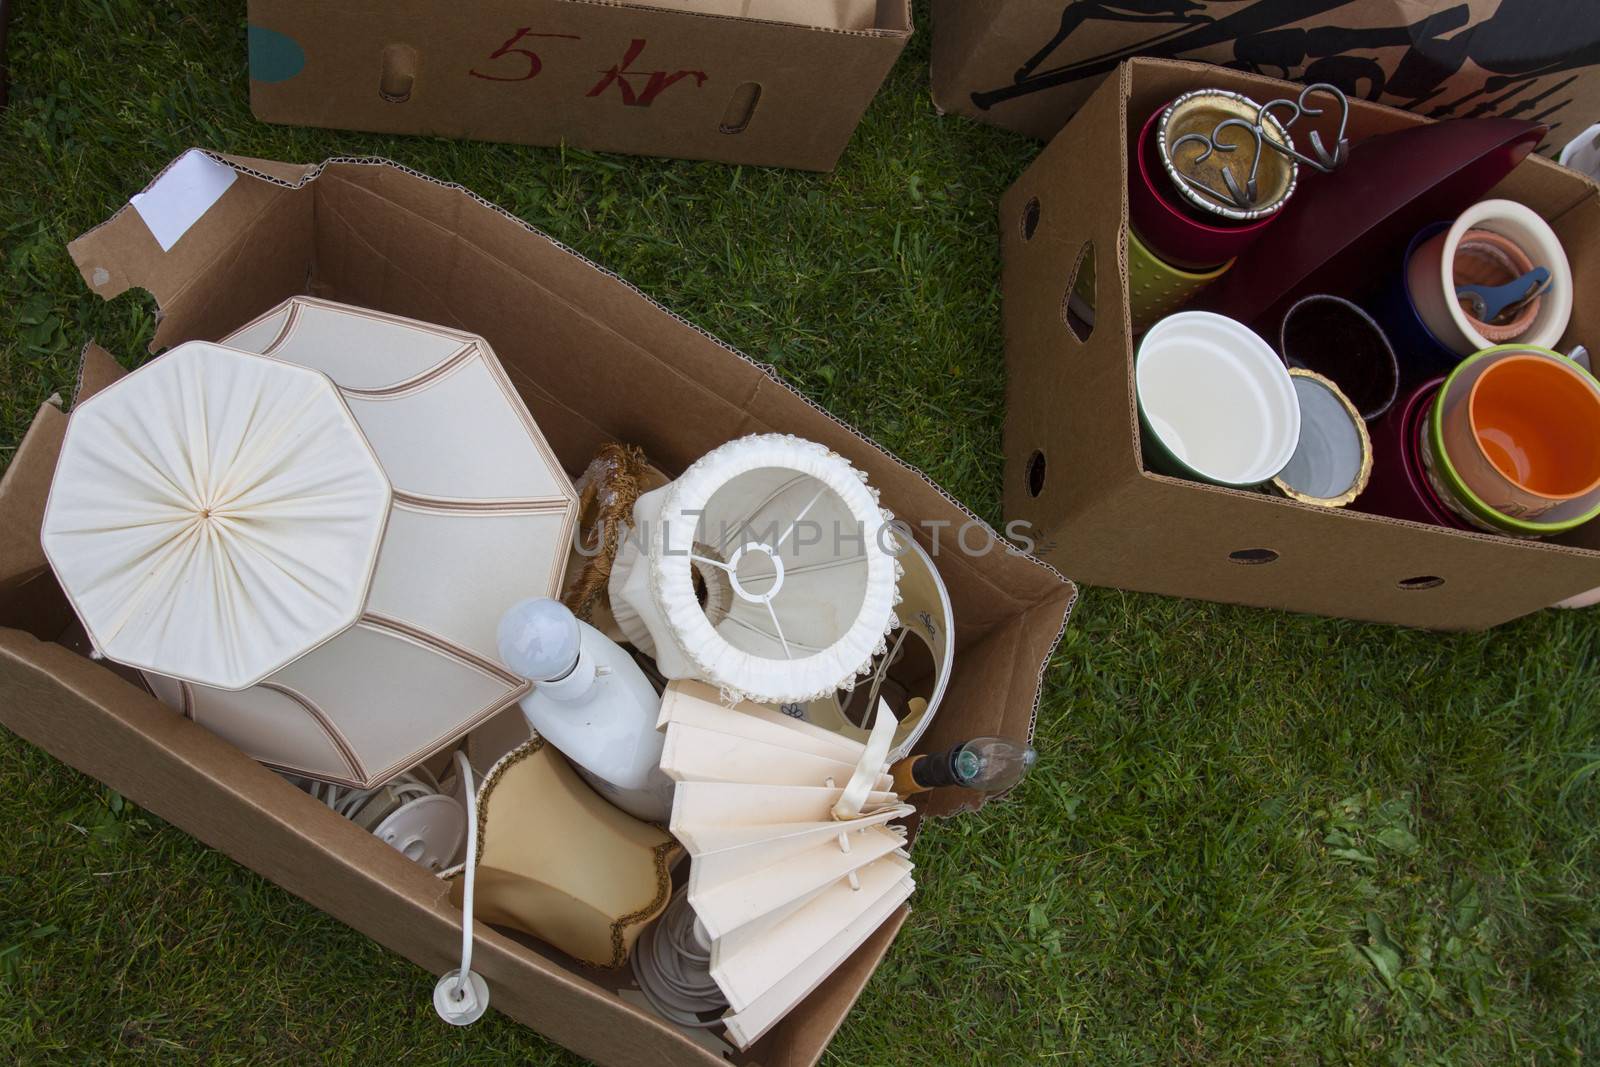 Boxes with lamps and other junk put out for an auction